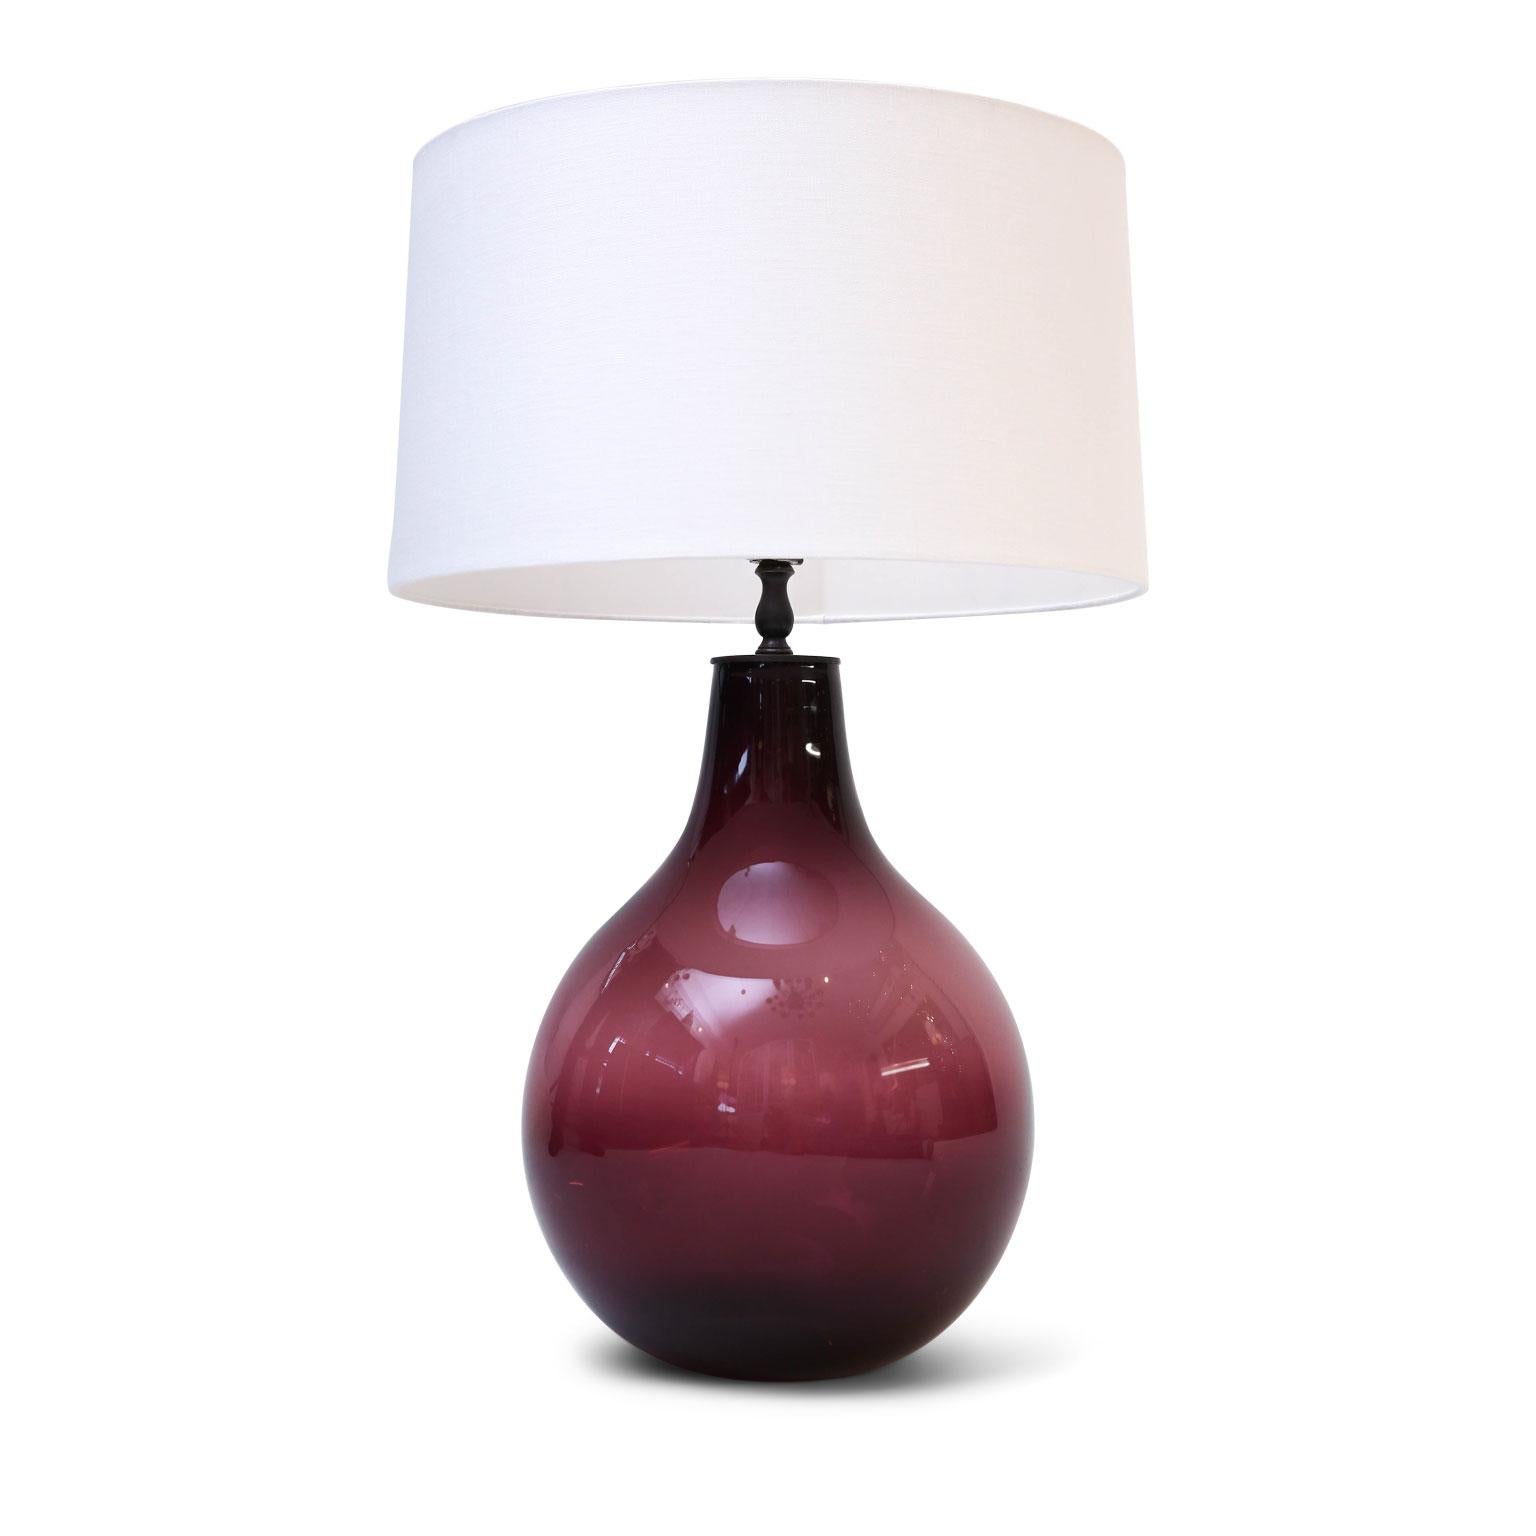 Amethyst glass lamp, from antique dark amethyst color glass bottle. Newly wired for use within the USA using all UL listed parts. Includes complimentary linen shade (listed measurements include shade).